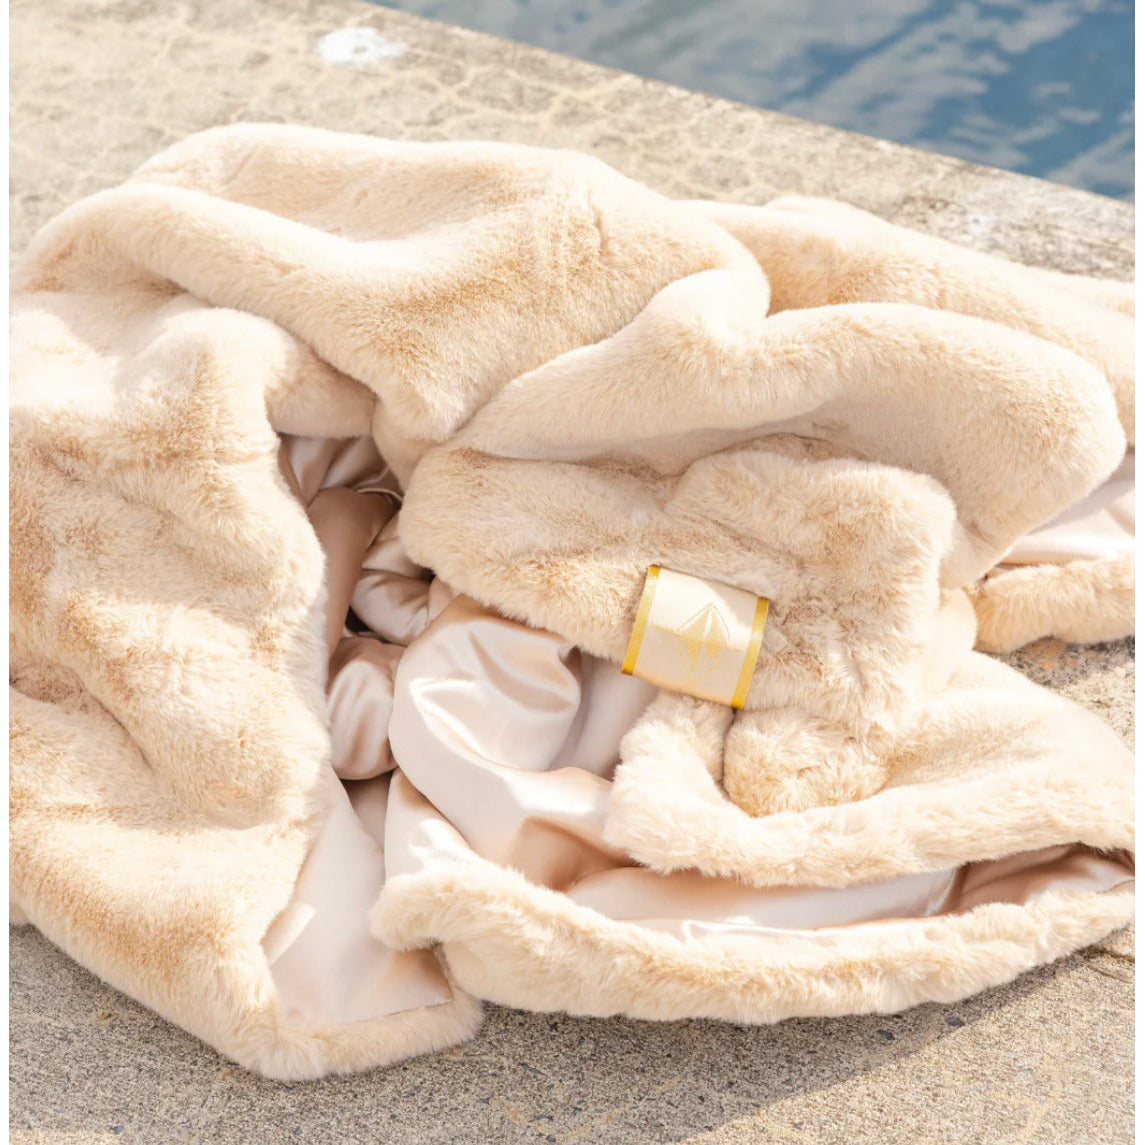 Luxe Faux Fur Baby Pink Mink Blanket | Pretty Rugged